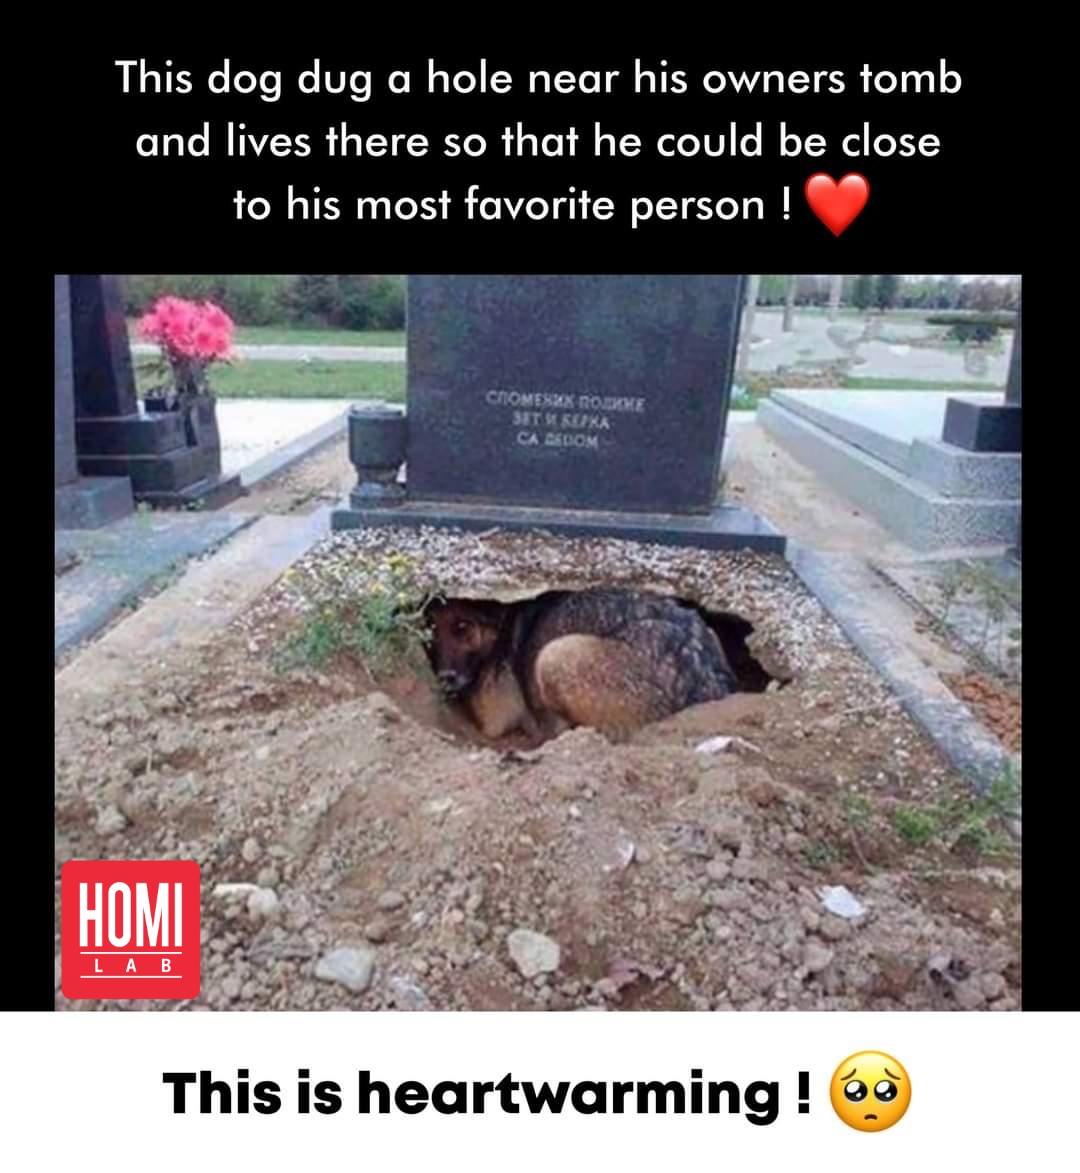 This dog is a reminder of the bond between humans and animals. He is willing to give up his own comfort to be close to his owner, even in death. This is a beautiful story of love and loss.
#dog #love #loyalty #unconditionallove #bond #humananimalbond #death #grief #loss #pet